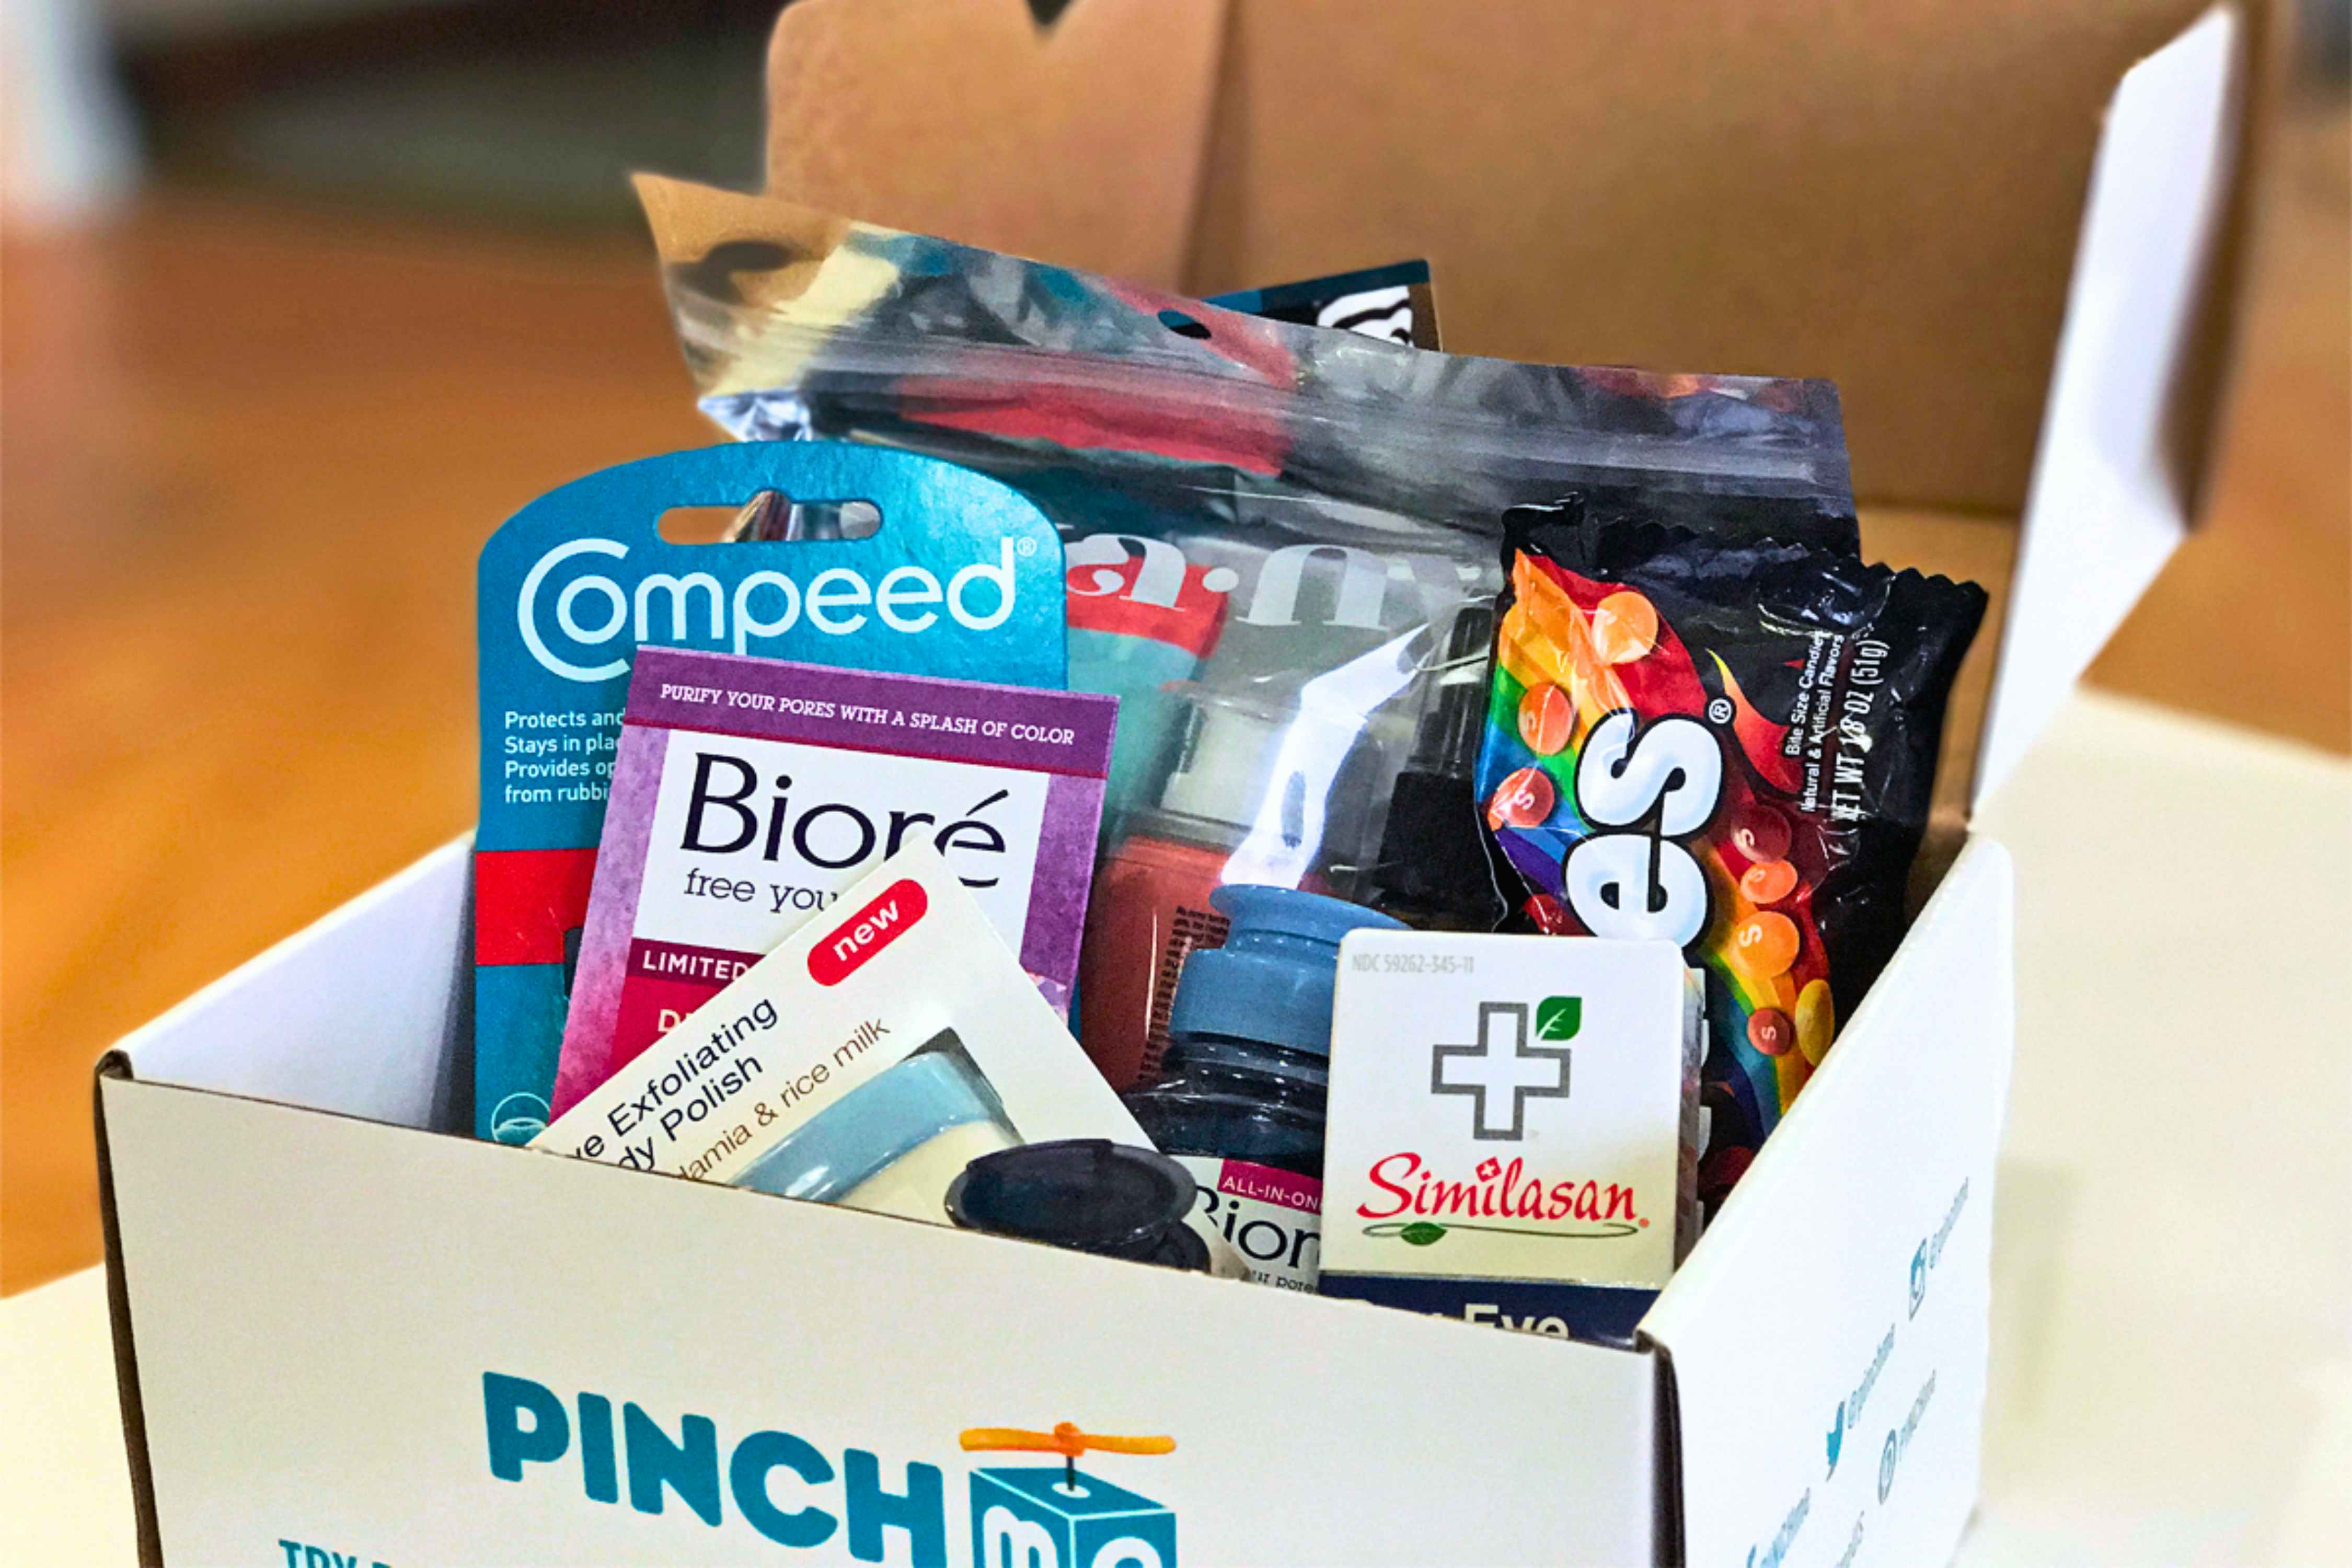 Score Free Samples From Your Favorite Brands With PINCHme